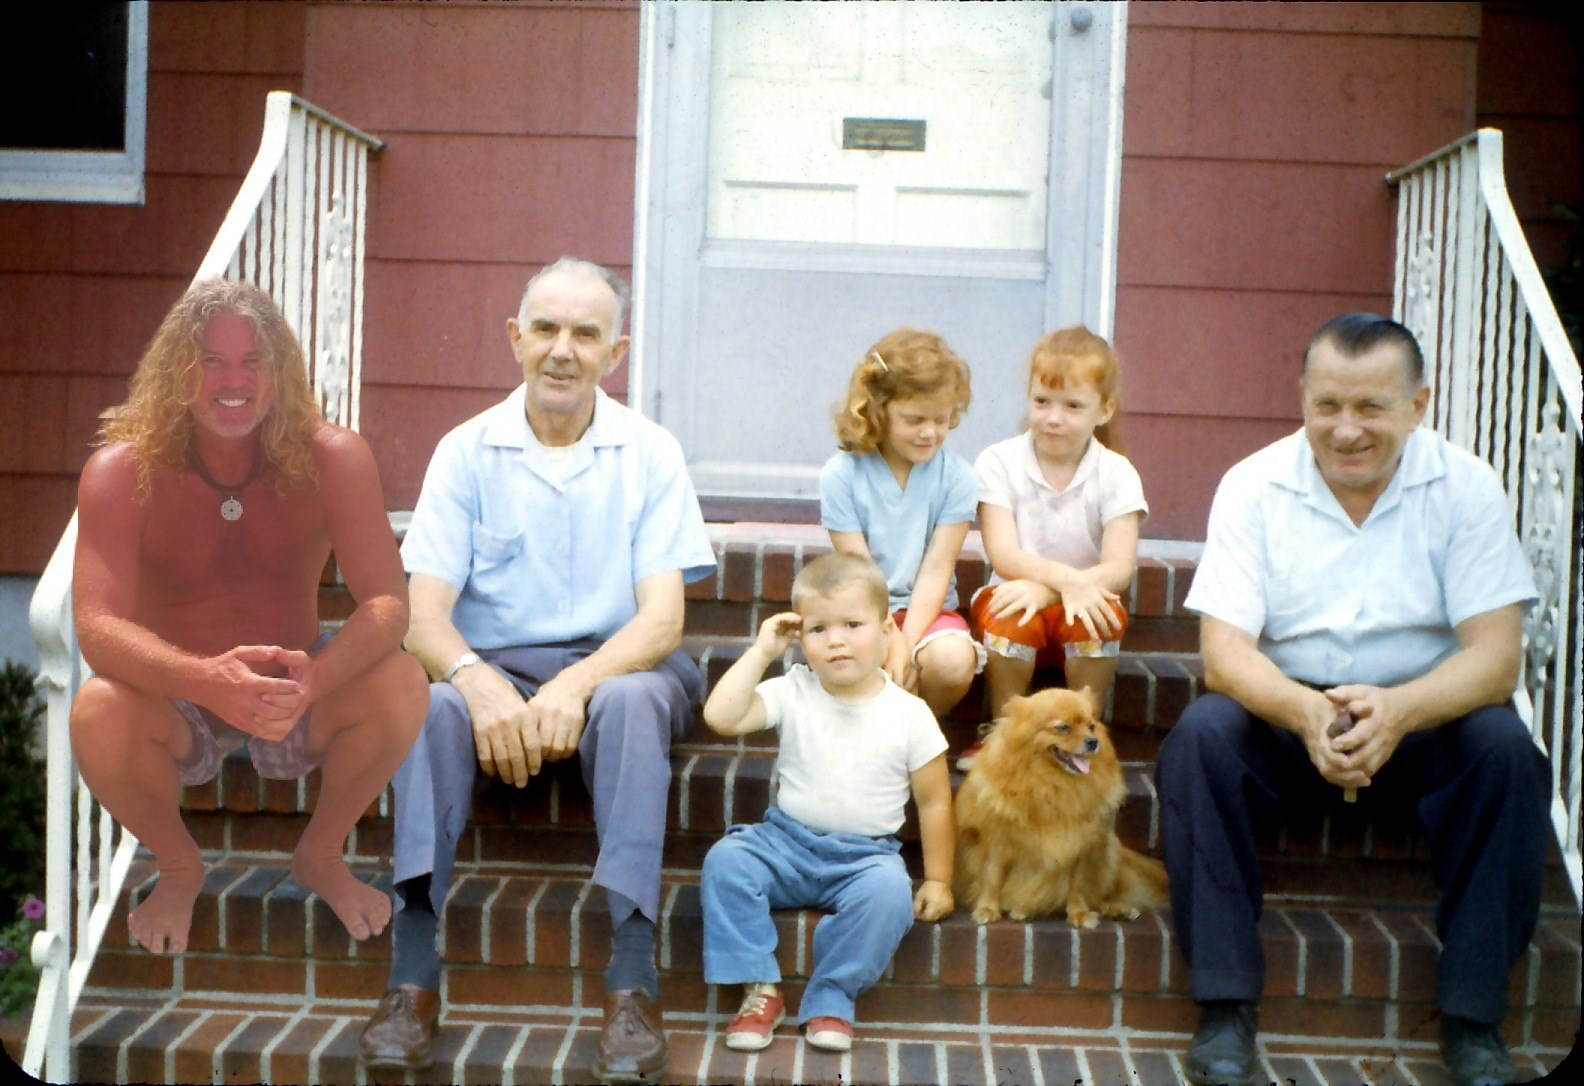 I superimposed a picture of myself sitting with my grandfathers, my sisters, and little me.  My grandfathers and I are all about the same age in the below picture.